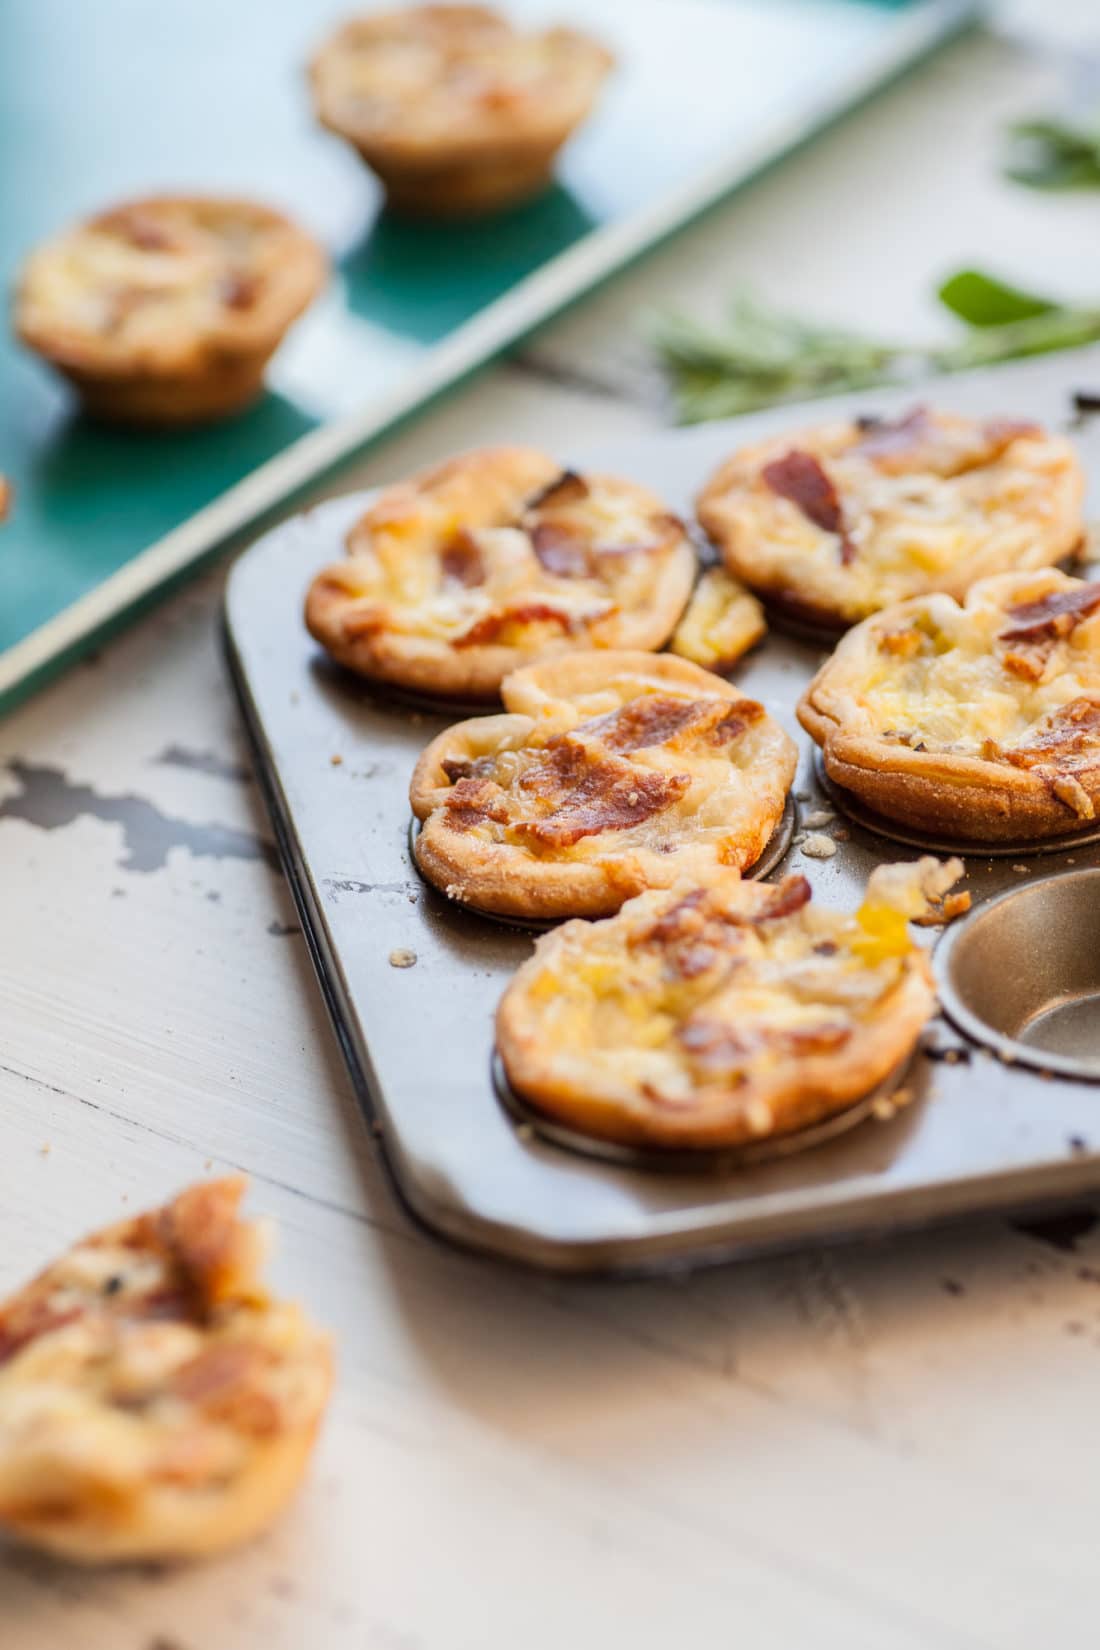 Bacon, Leek, Mushroom and Cheese Mini Quiches / Carrie Crow / Katie Workman / themom100.com